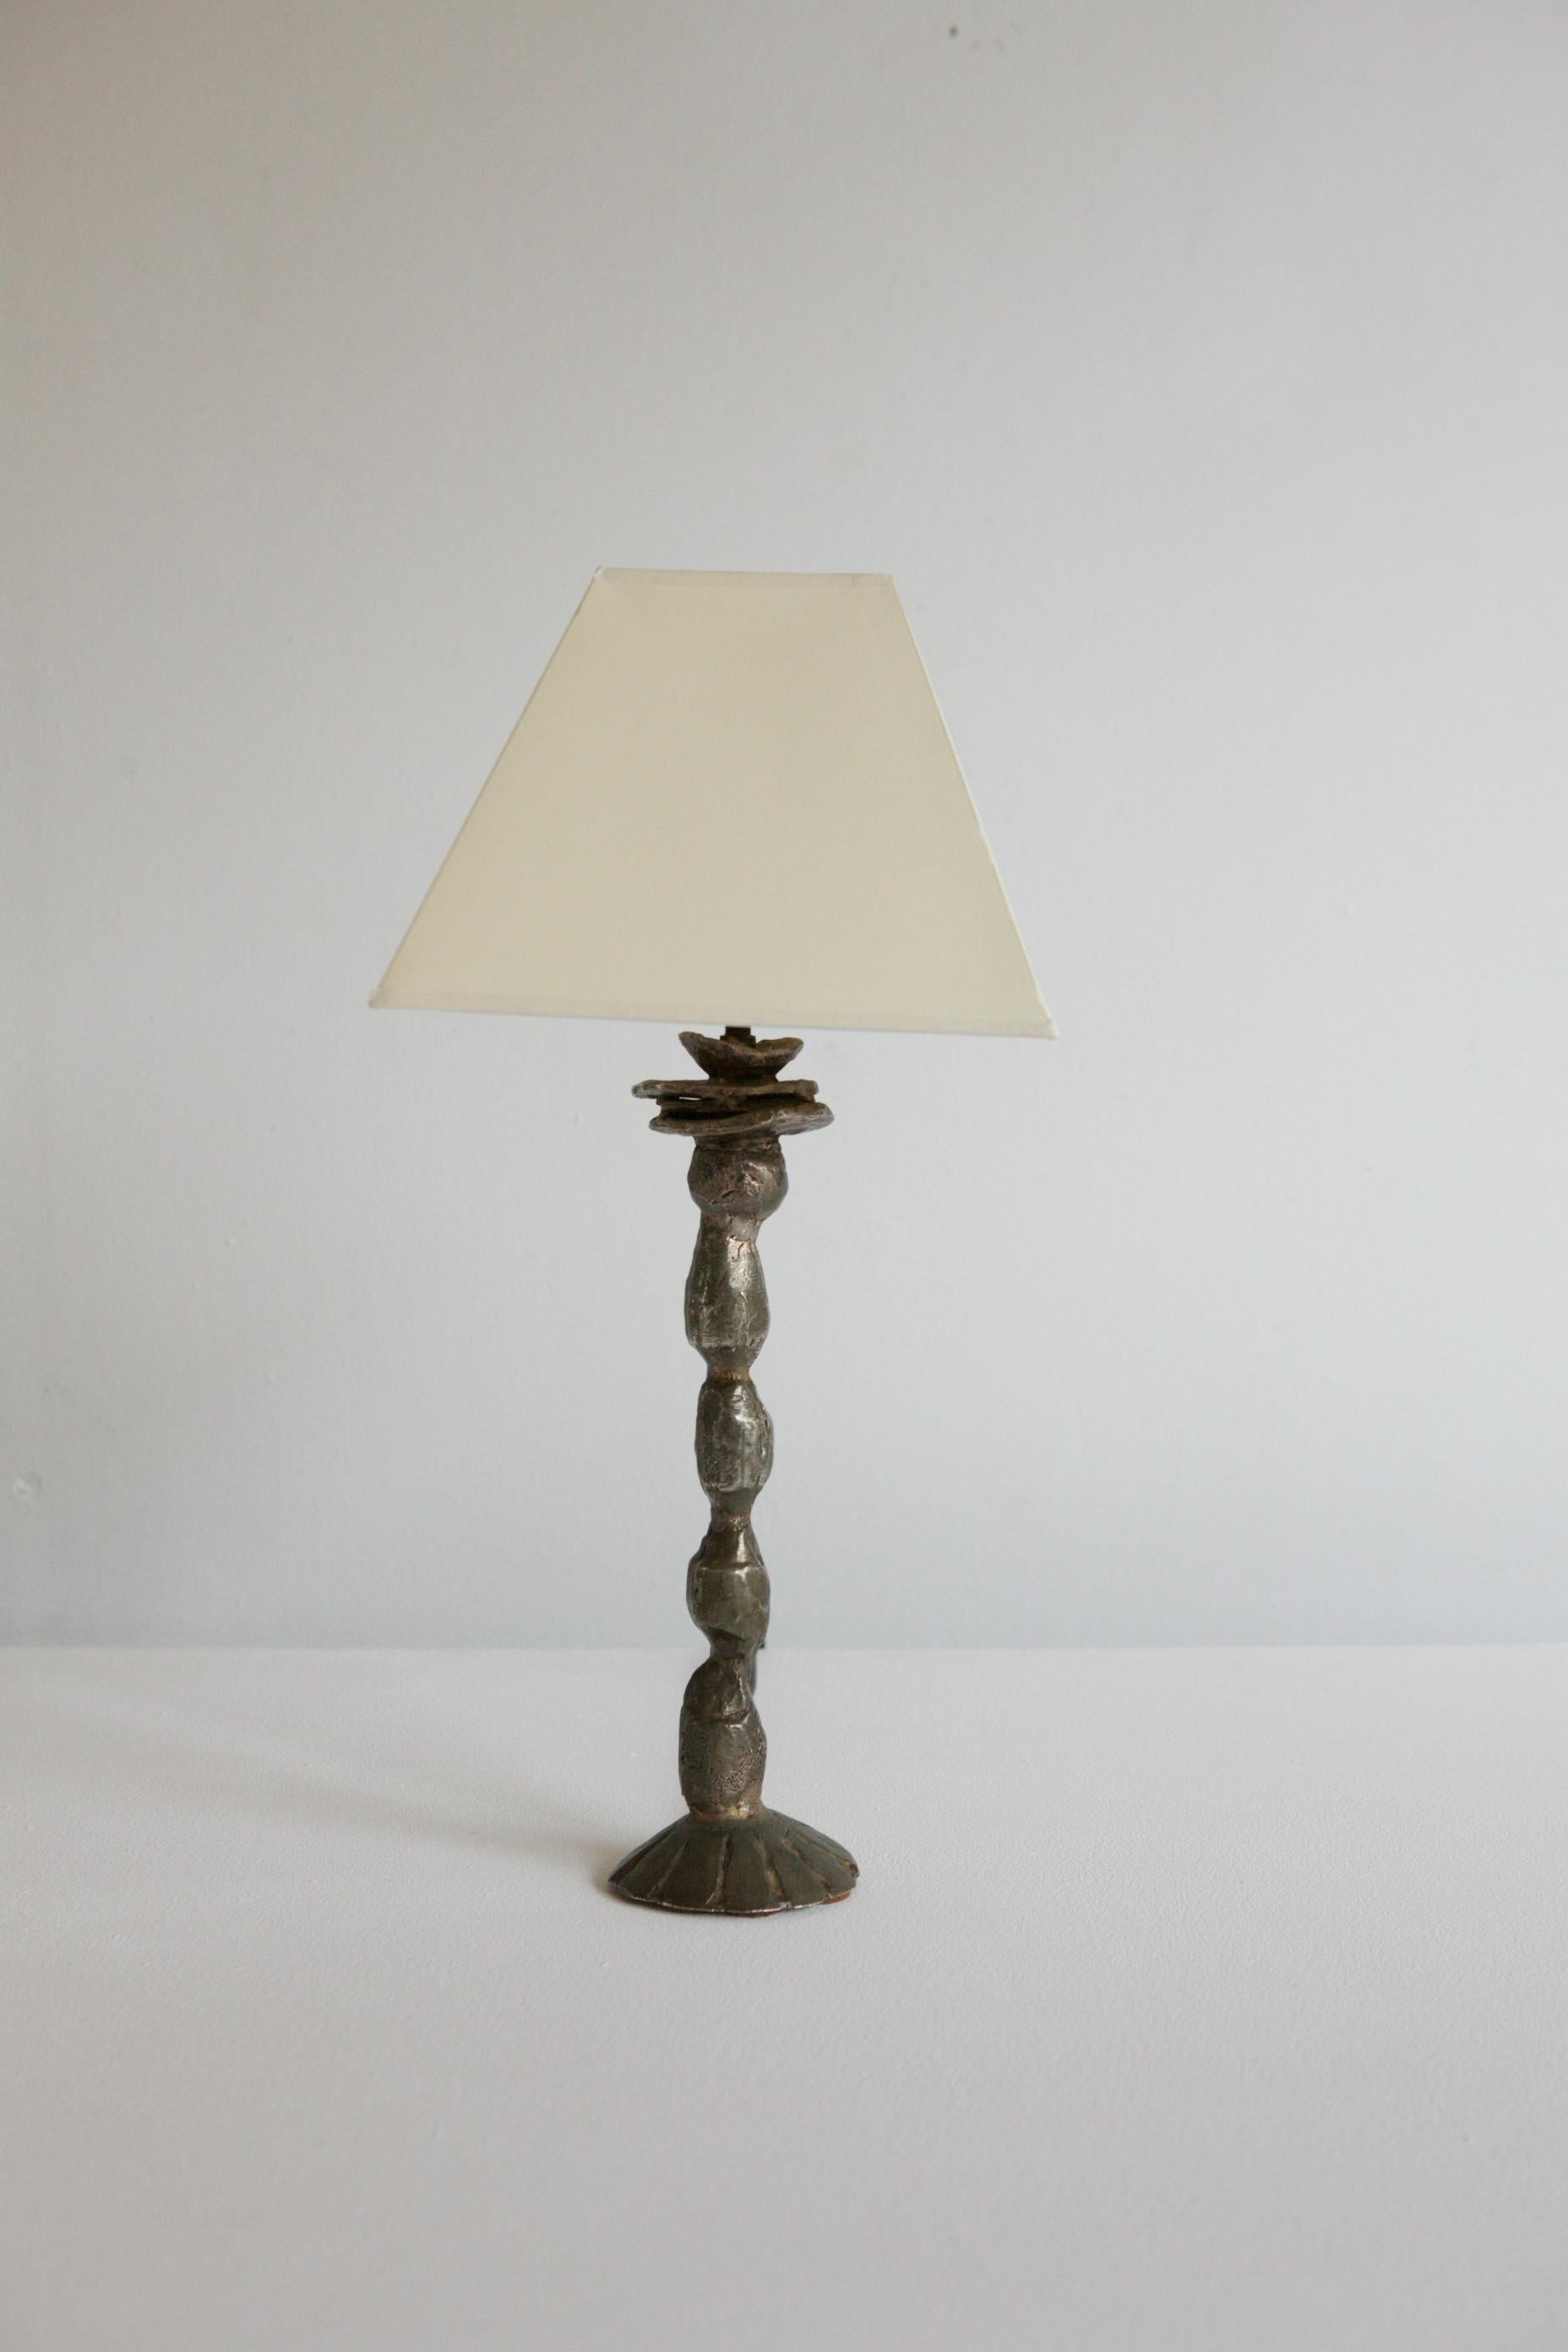 A very beautiful sculptural table lamp with a bronze base by the artists and designer Pierre Casenove for Fondica circa 1990's. The original scultpure would have been modelled out of clay and you can see the tool works in the resulting cast bronze.